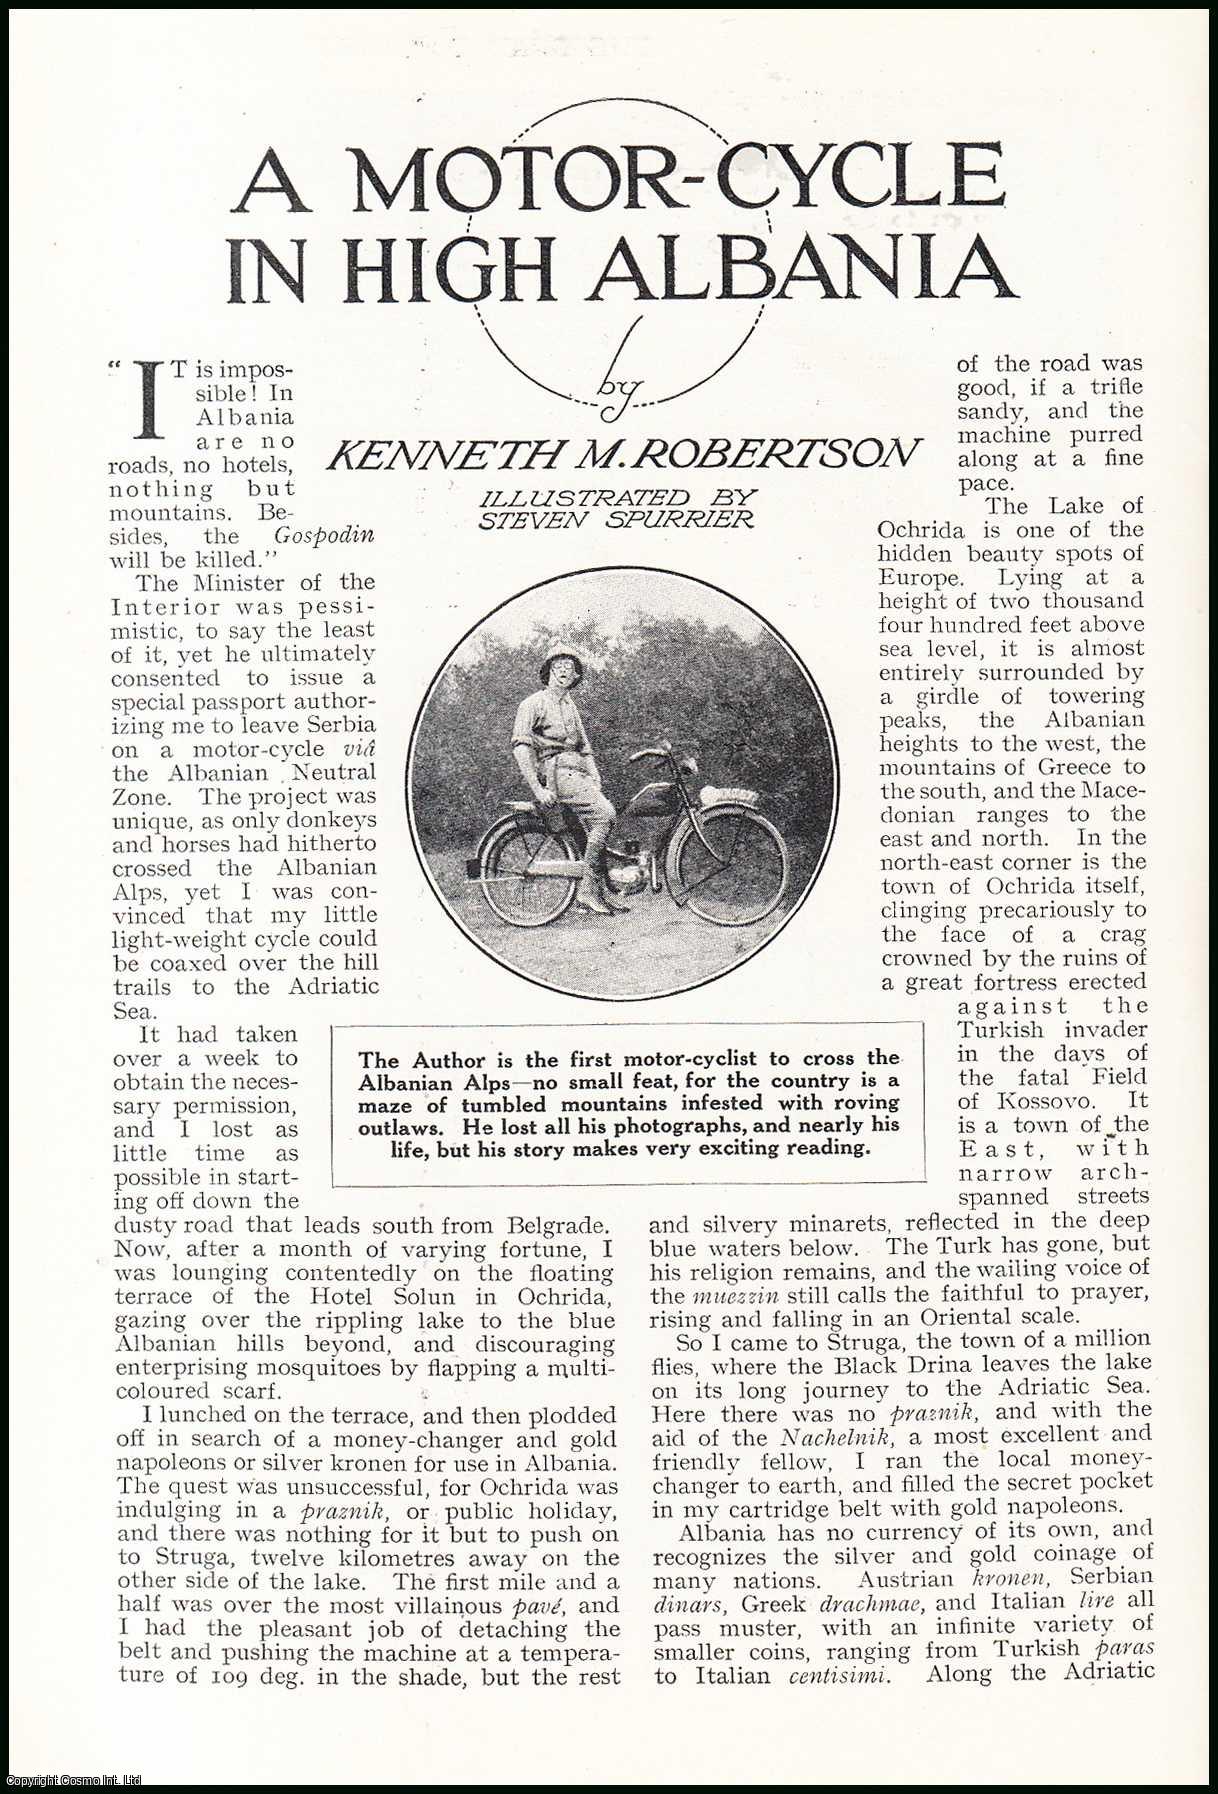 Kenneth M. Robertson. Illustrated by Steven Spurrier. - A Motor-Cycle in High Albania : Kenneth, the first motor-cyclist to cross the Albanian Alps. An uncommon original article from the Wide World Magazine, 1924.